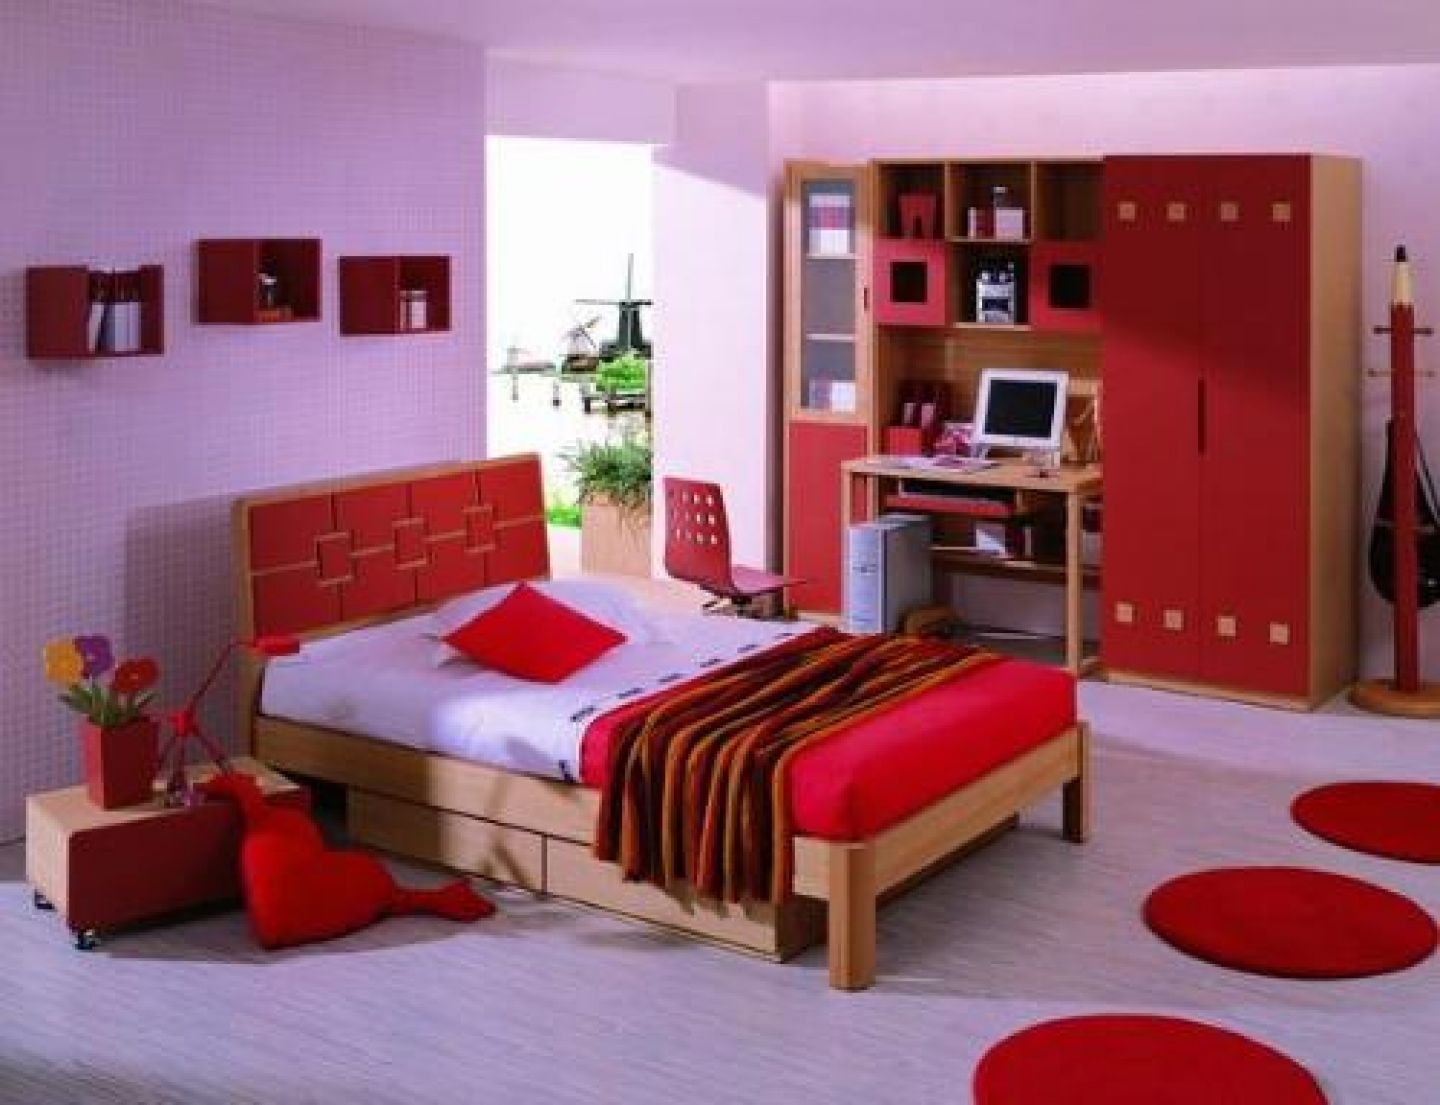 bedroom color themes photo - 1